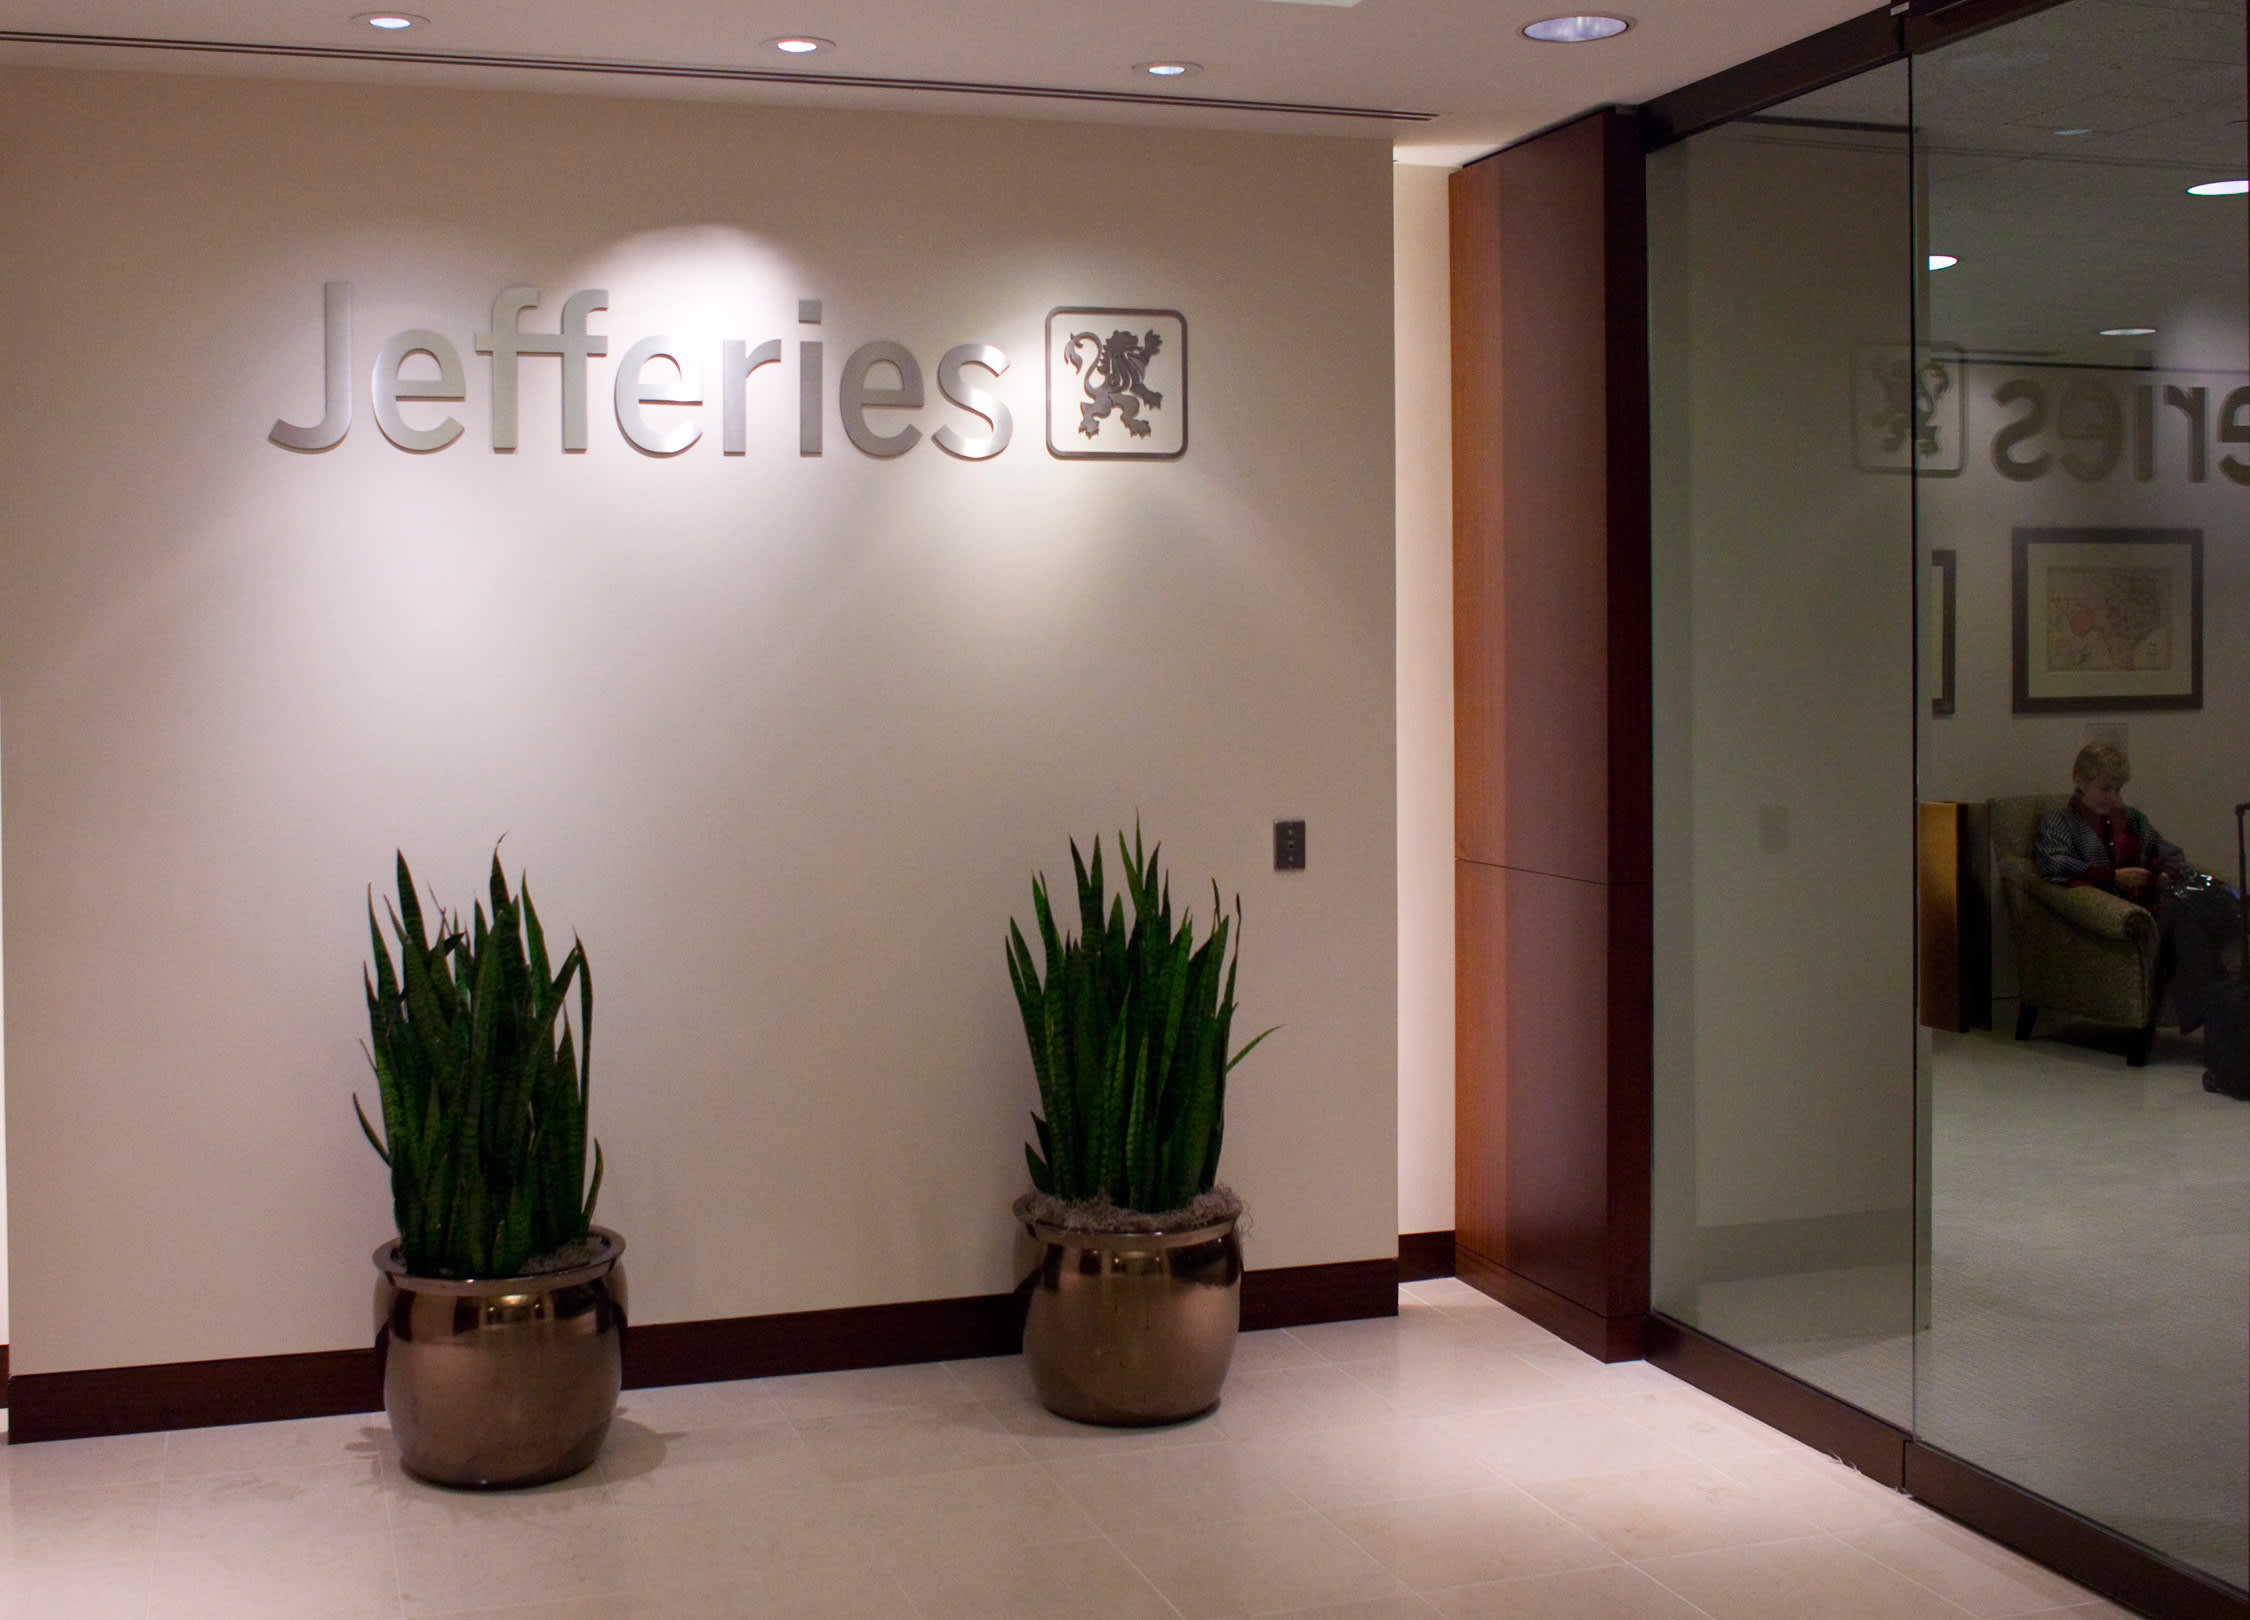 Jefferies names its top stock picks for 2022